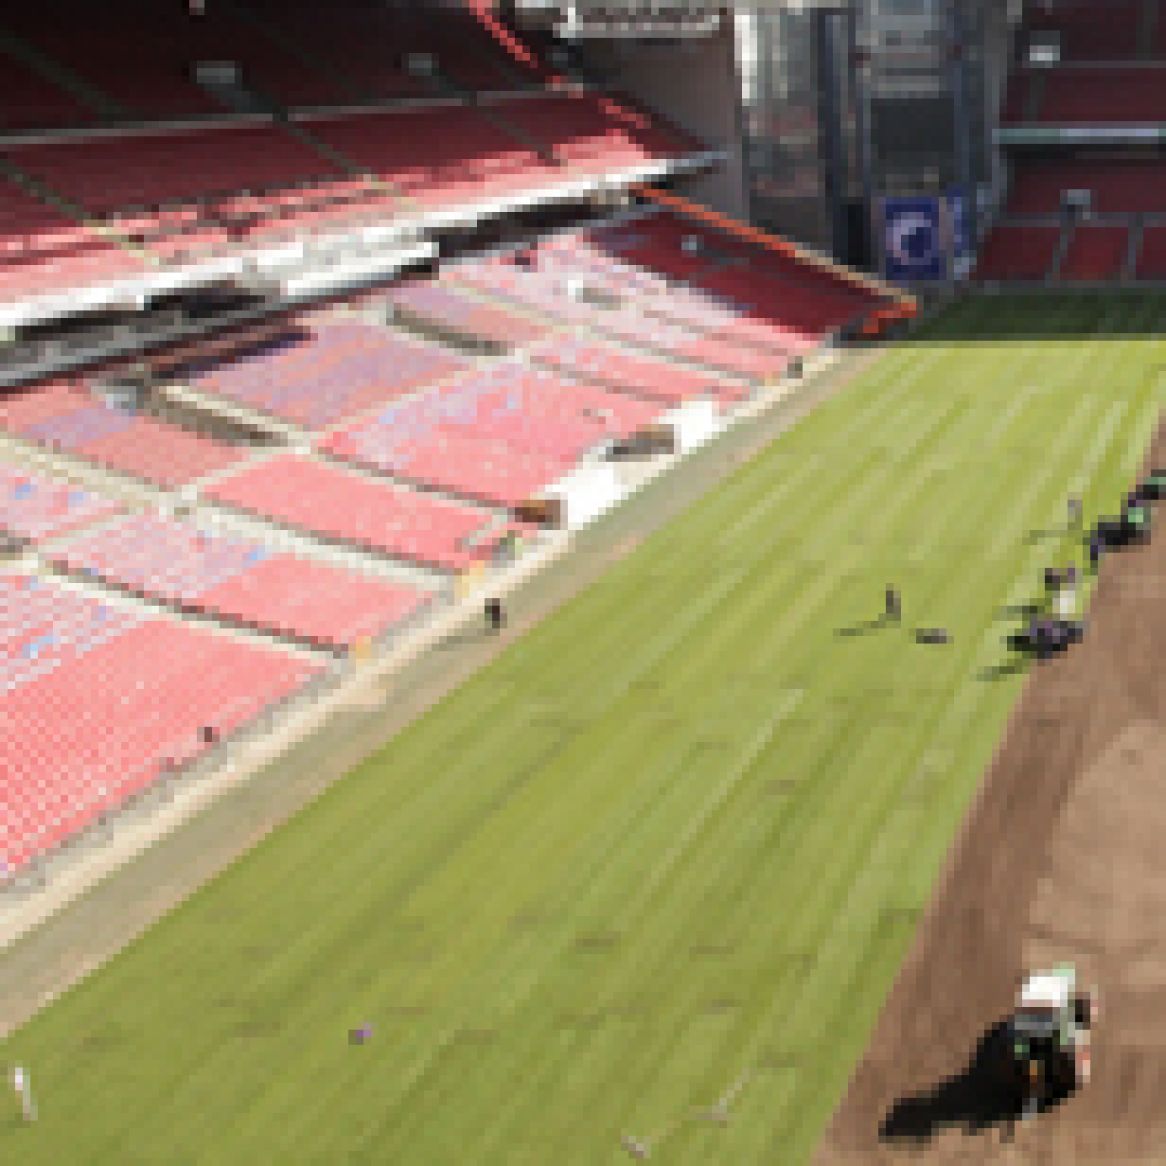 New pitch laid in PARKEN